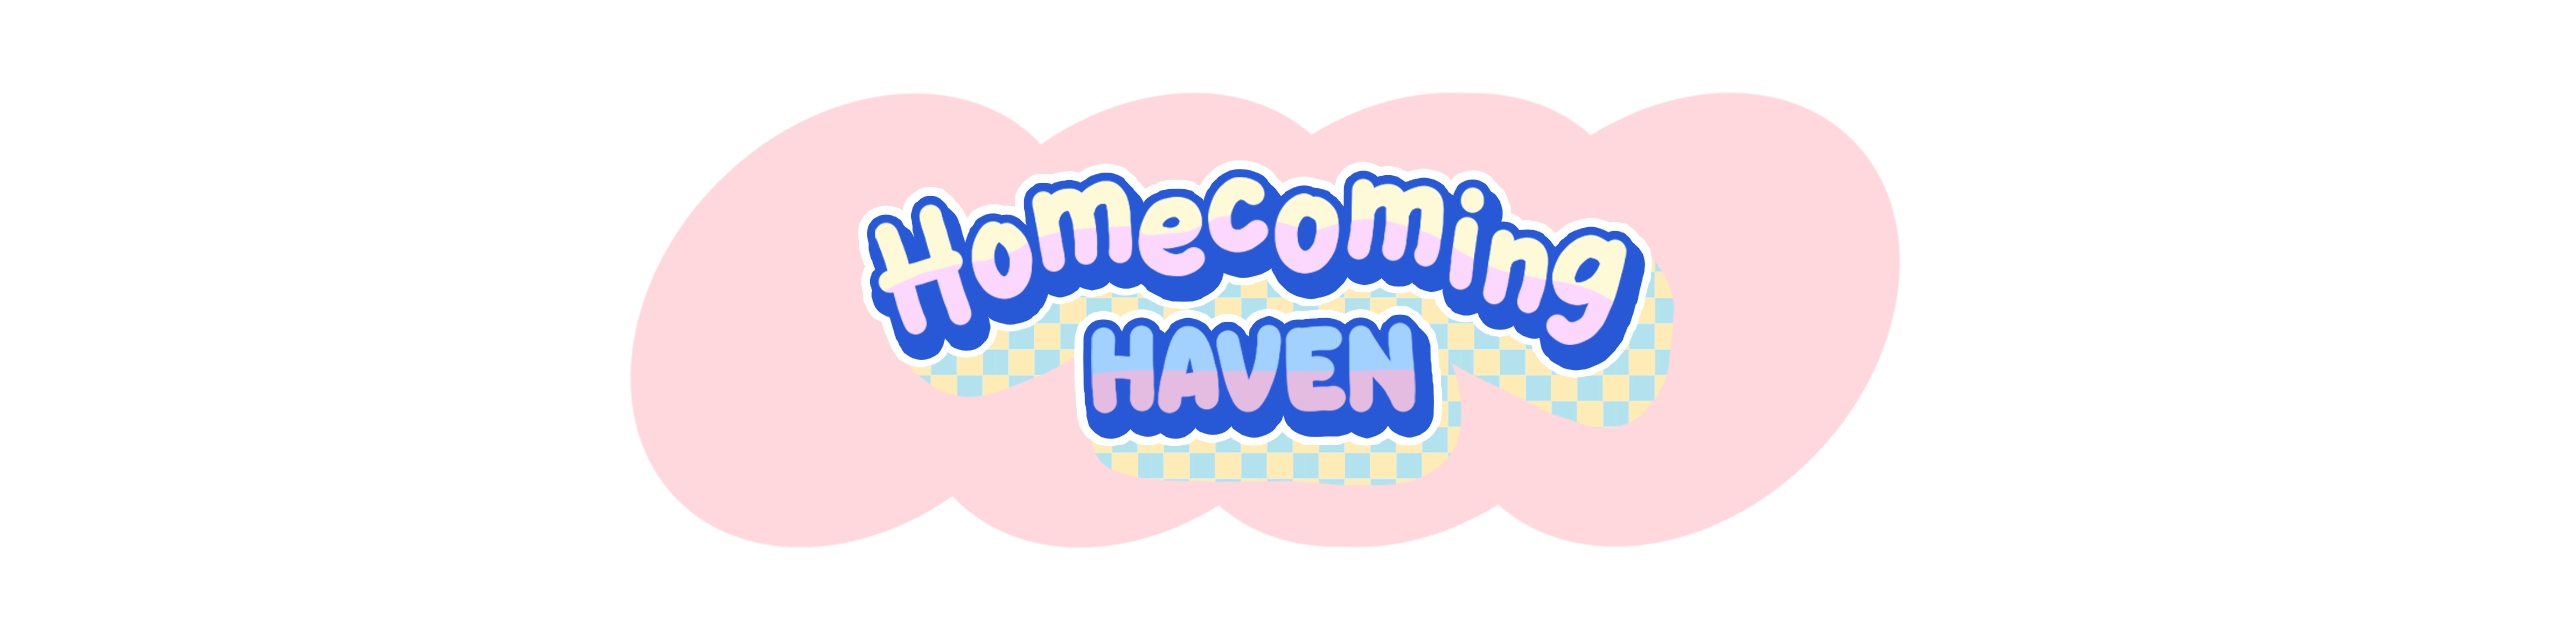 Homecoming Haven